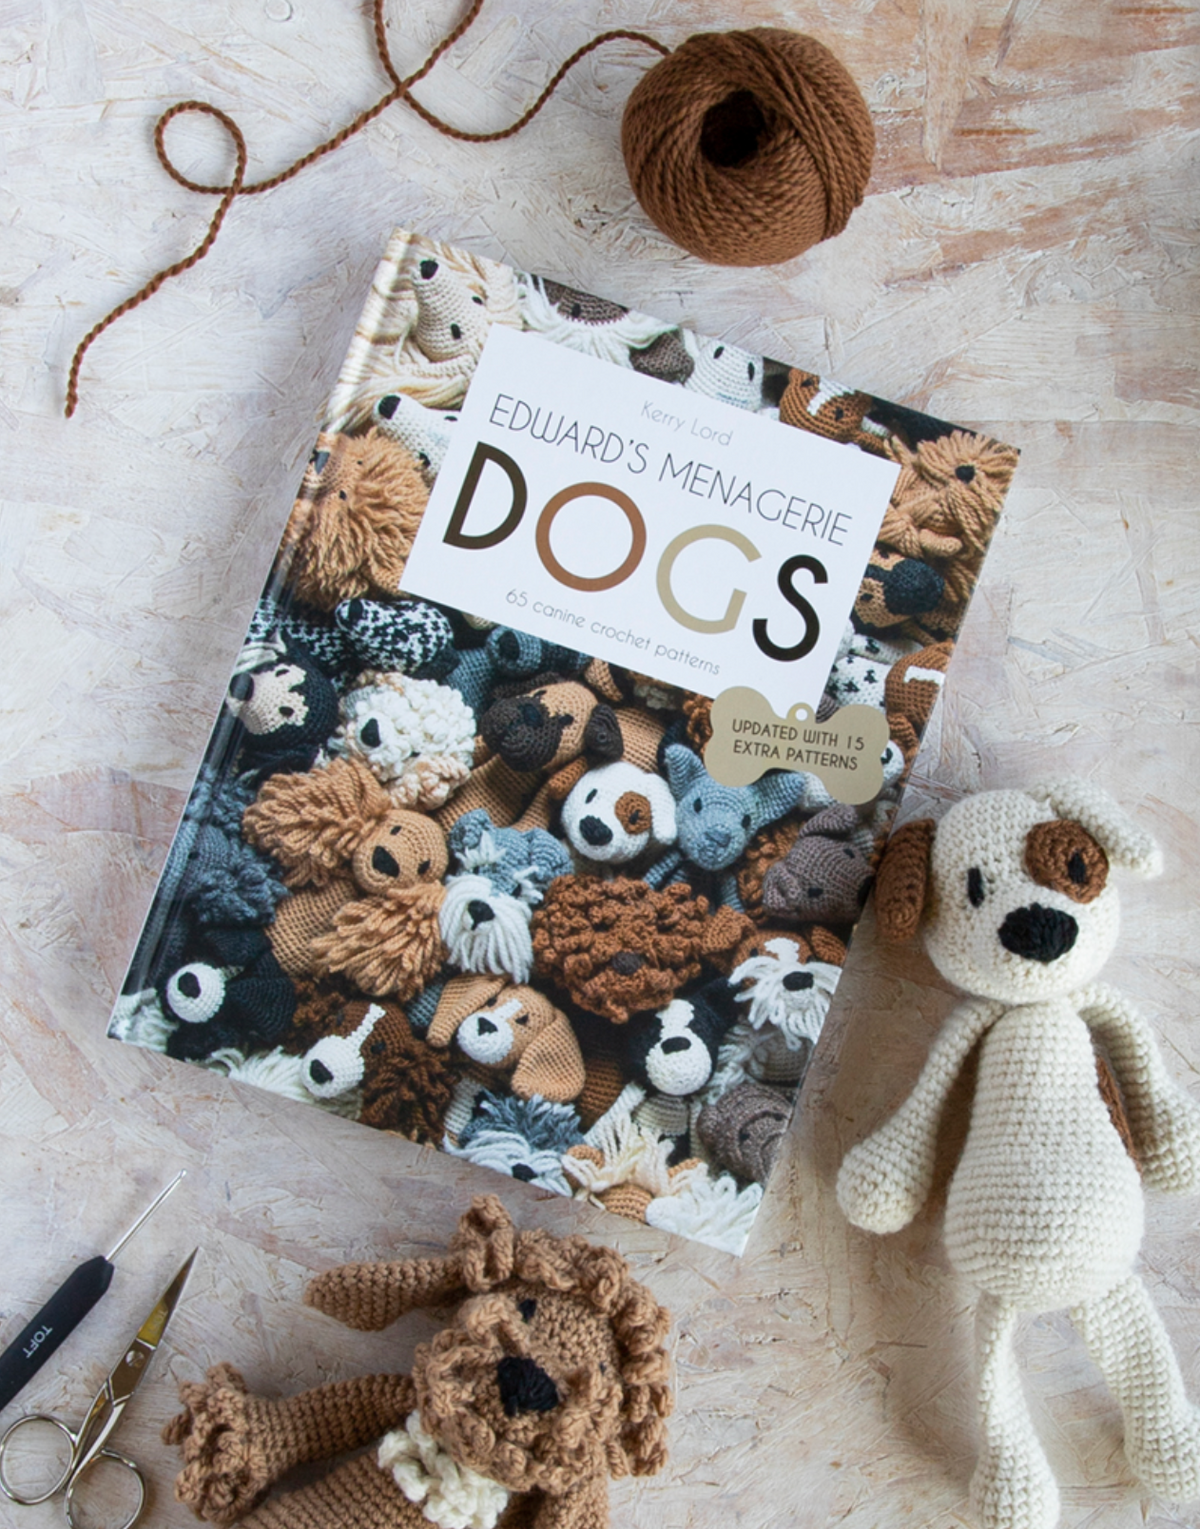 TOFT - Edward's Menagerie Book by Kerry Lord - YourNextKnit